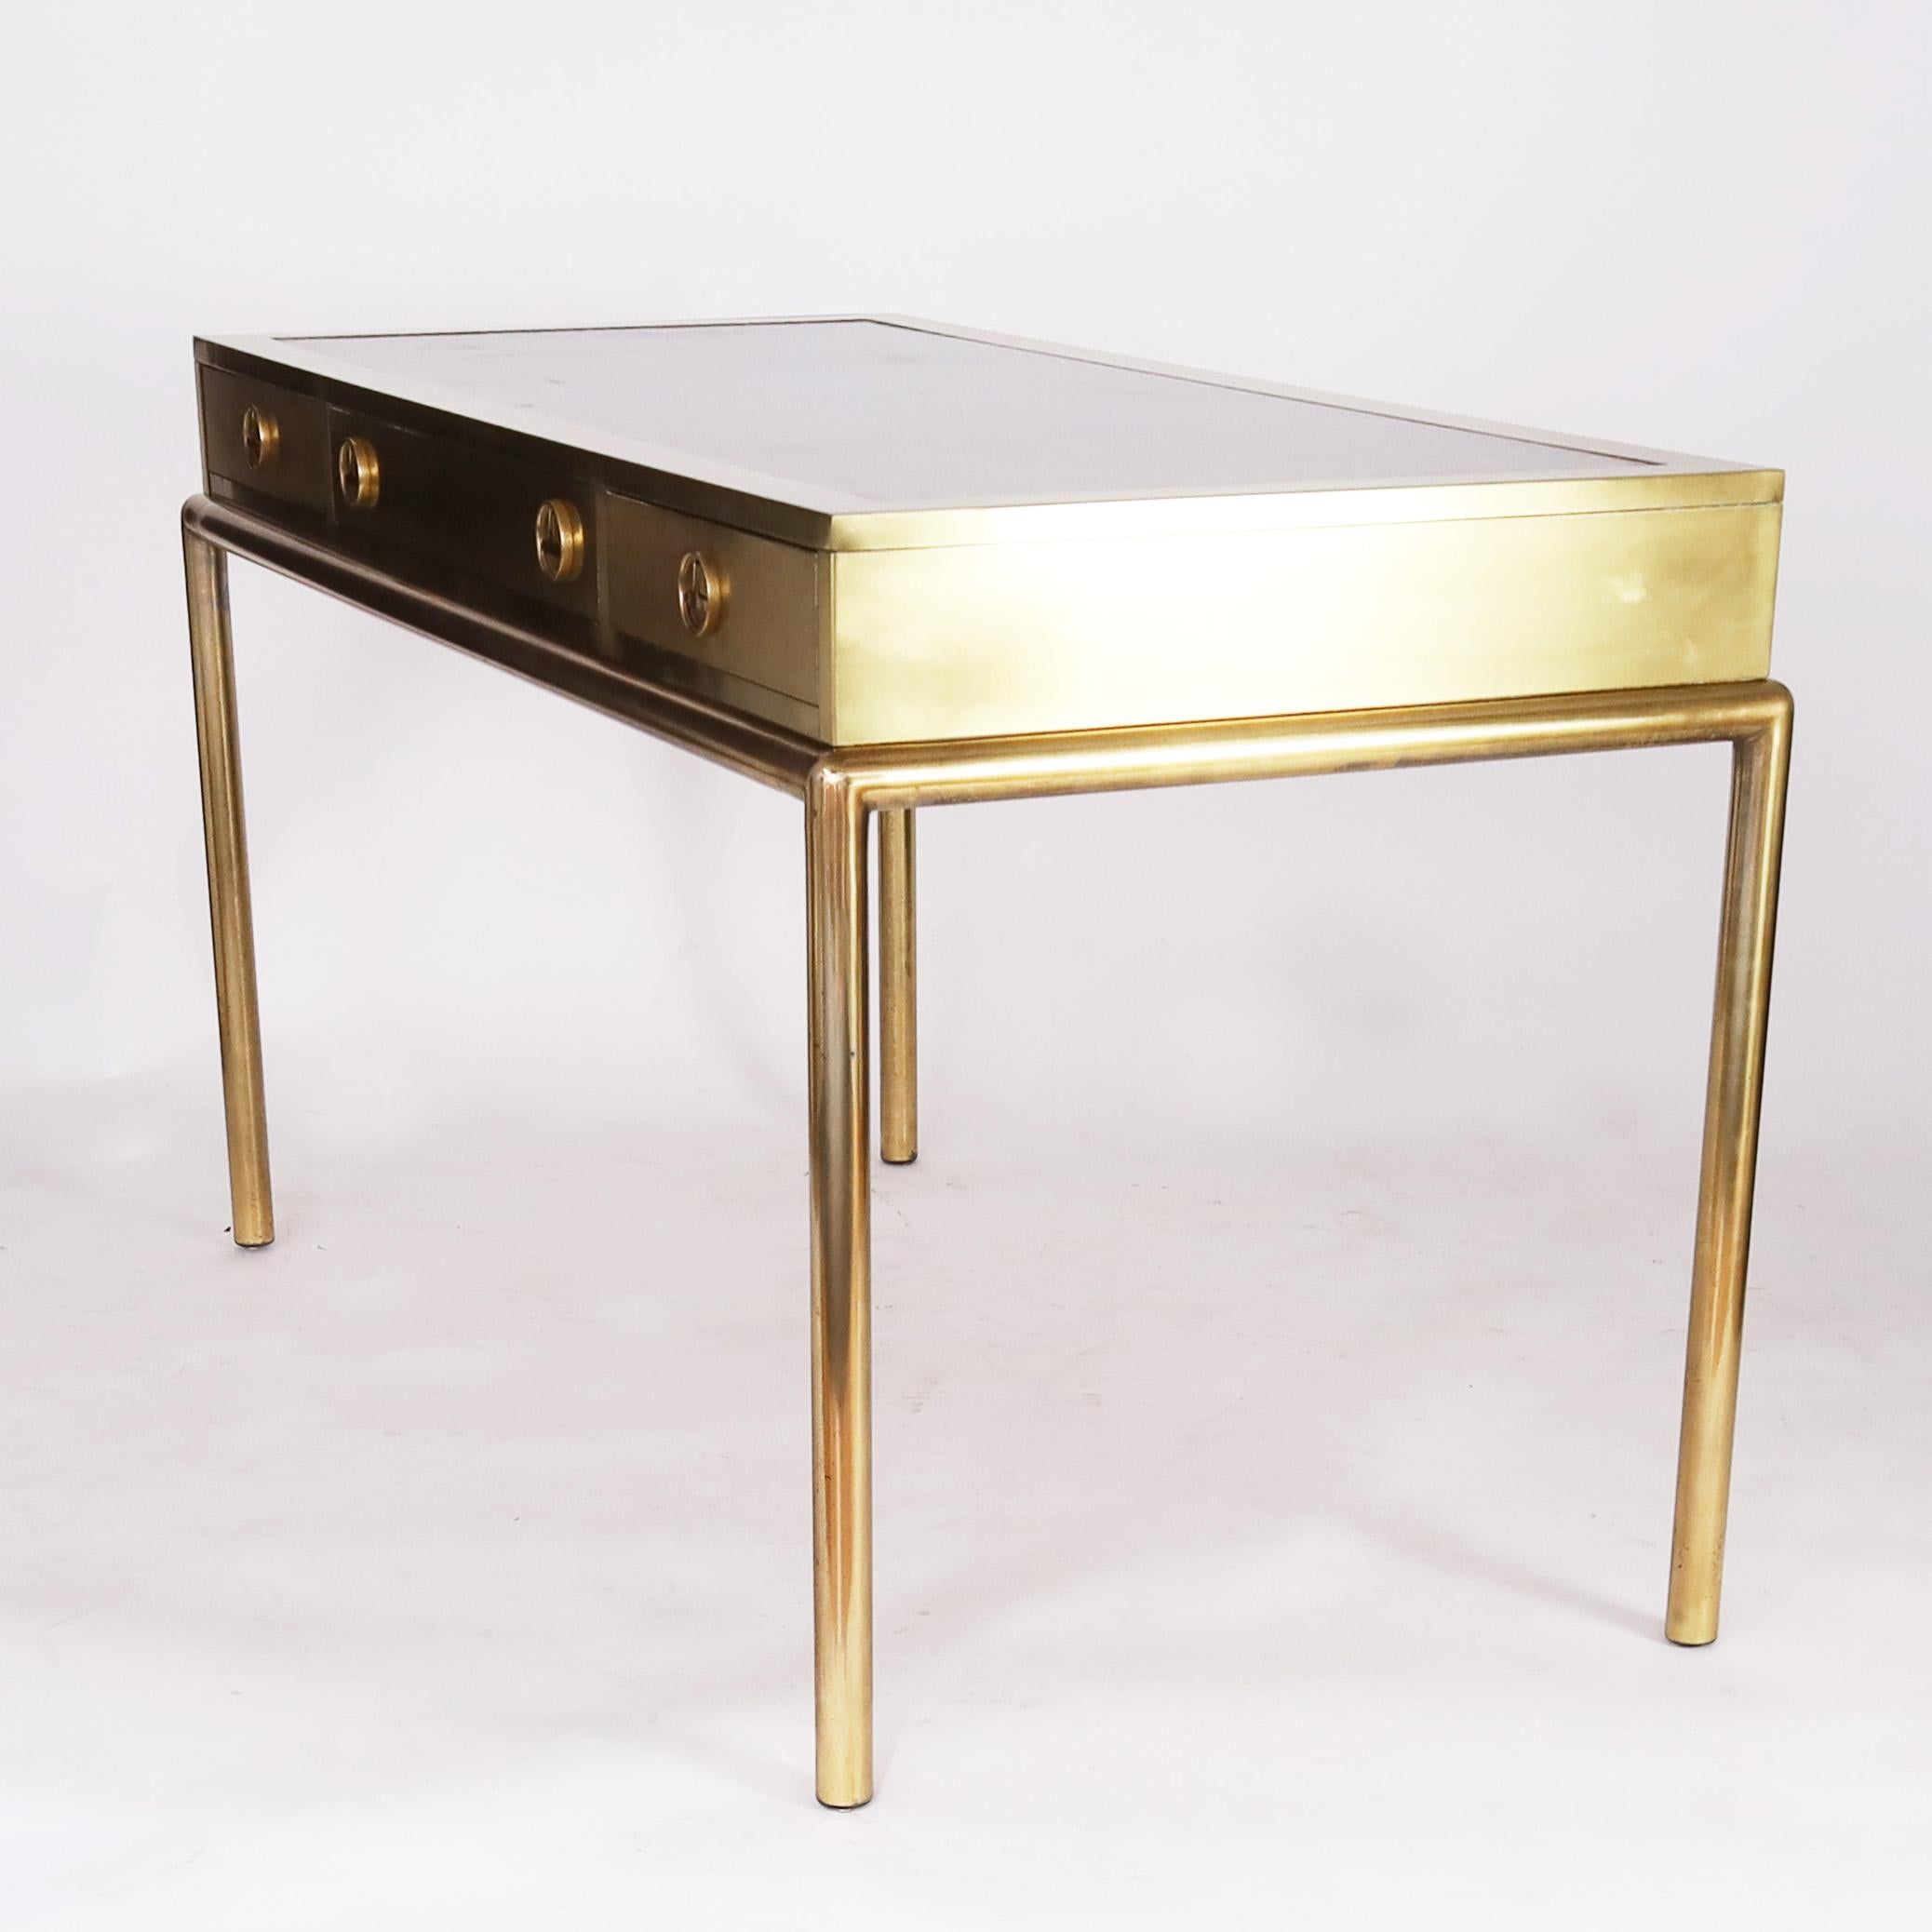 American Mastercraft Mid Century Leather Top Brass Desk For Sale